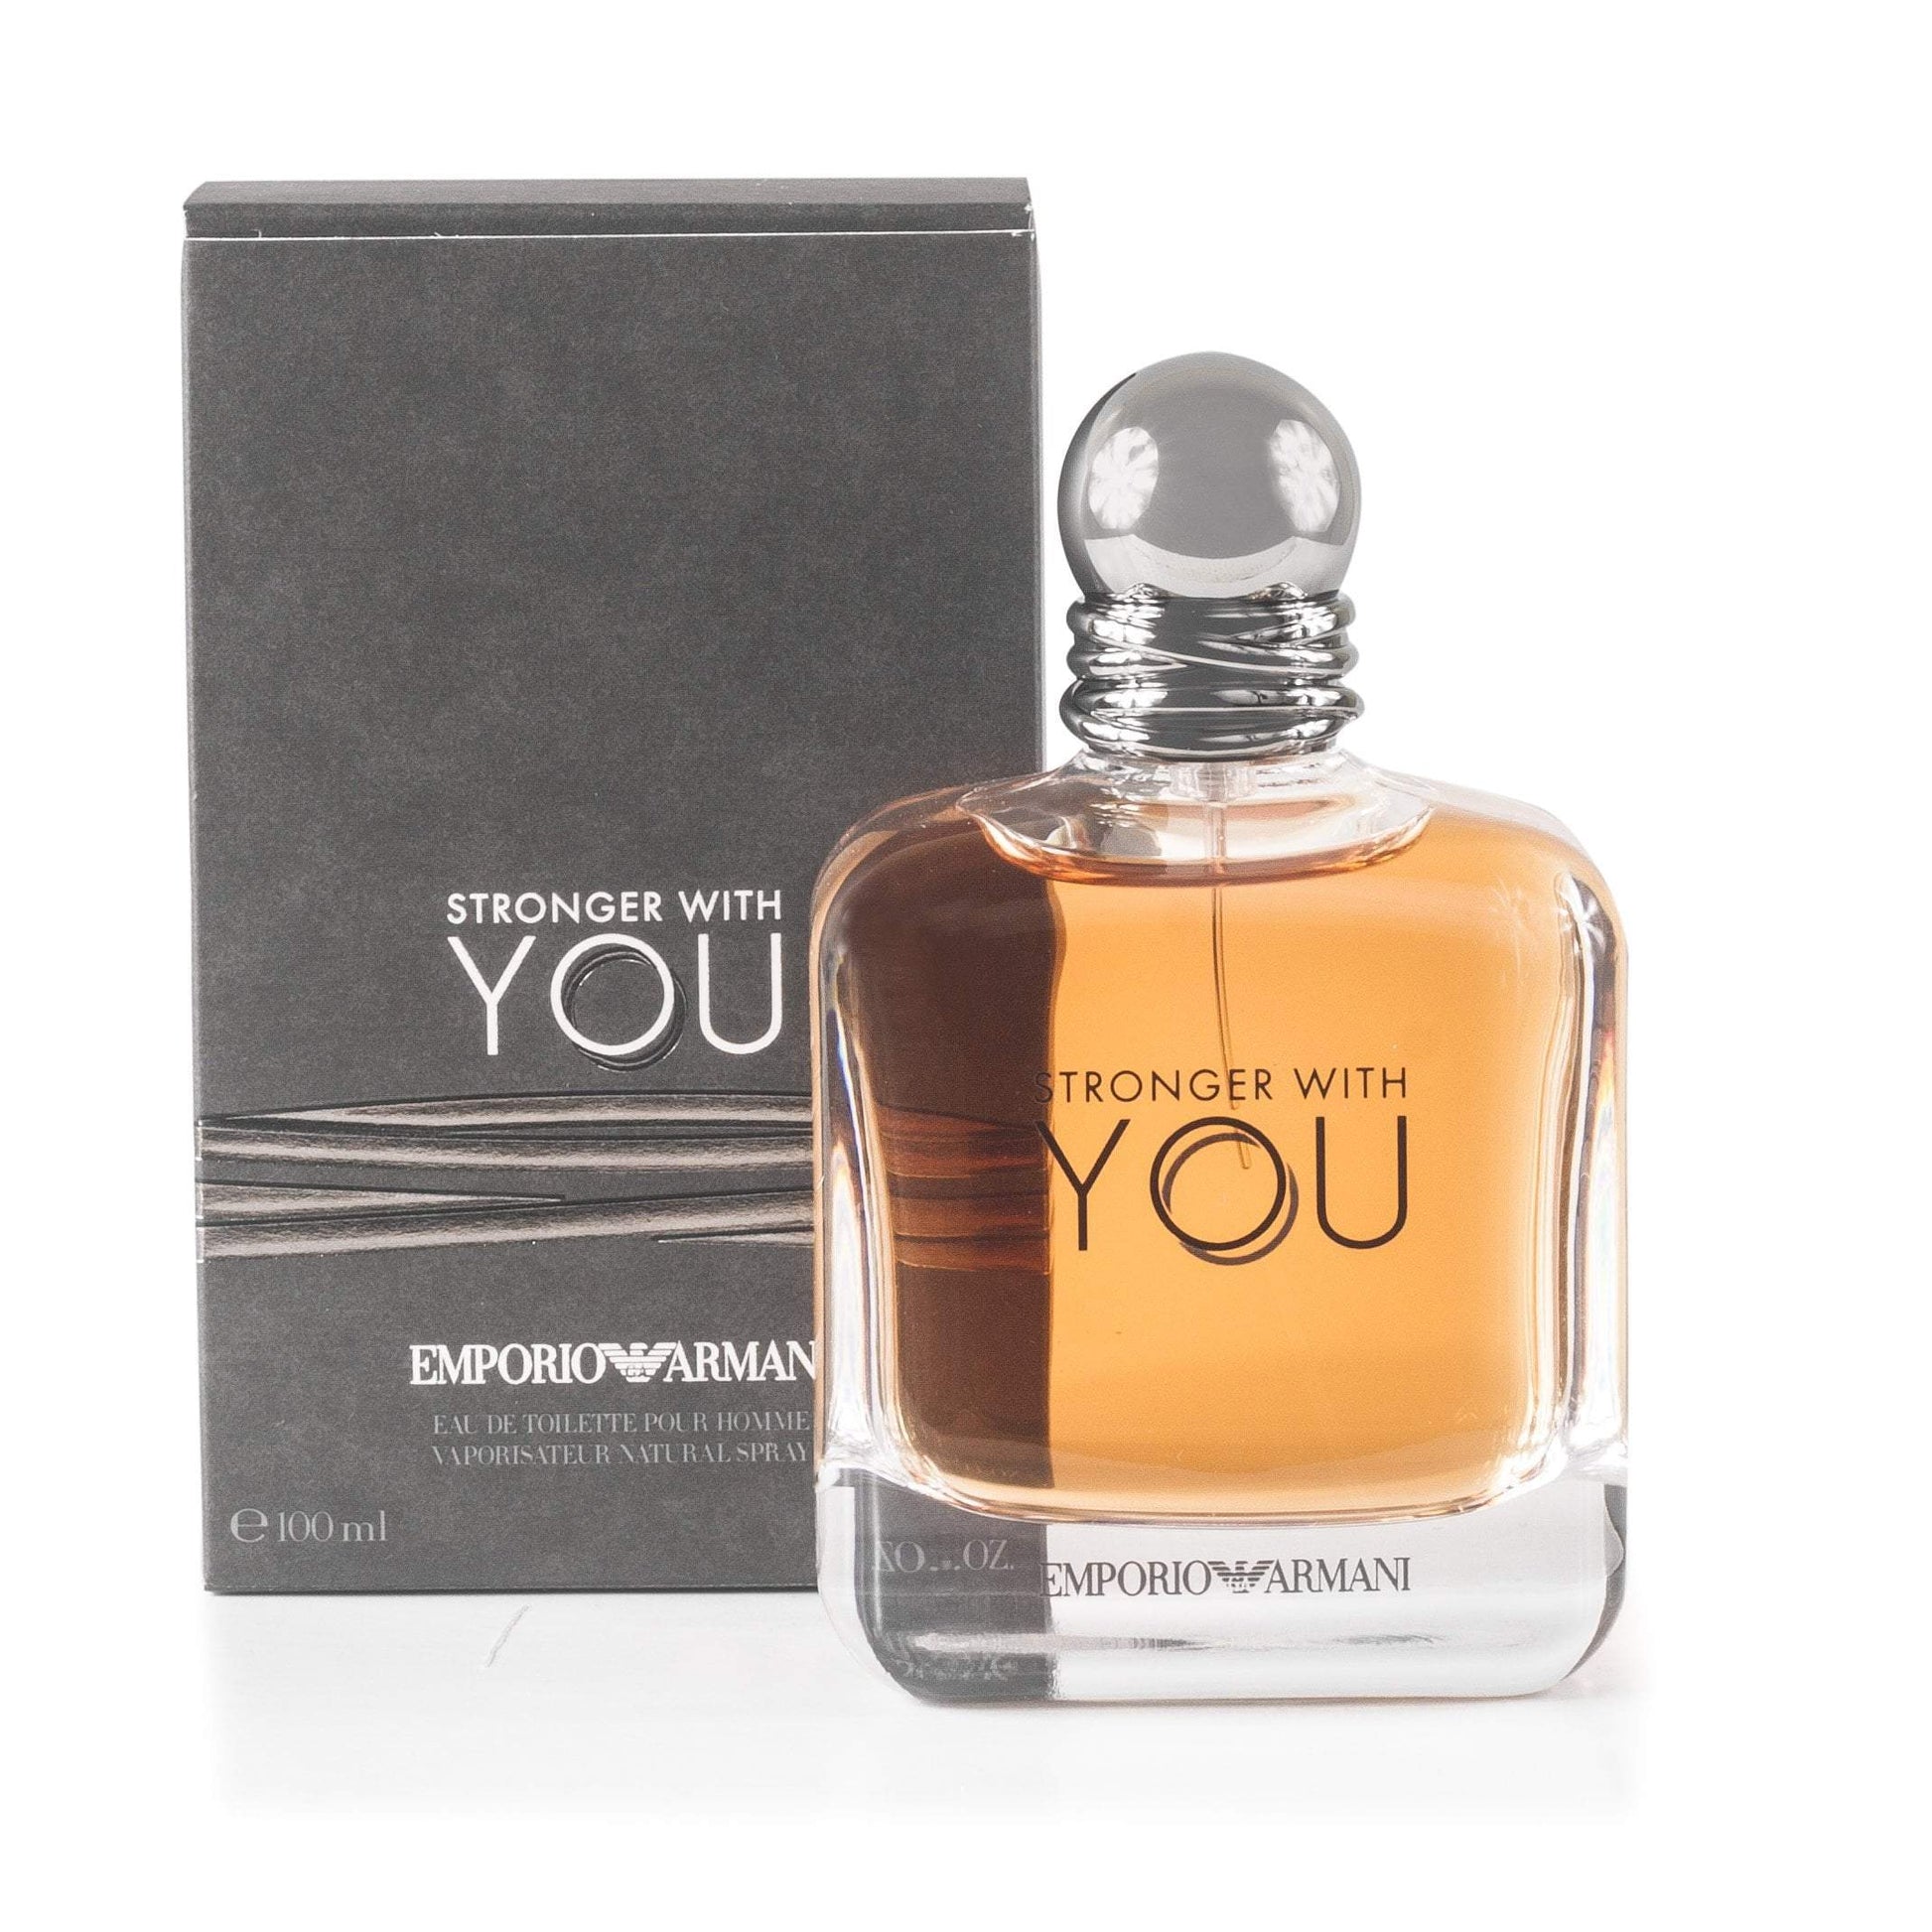 Stronger With You Eau de Toilette Spray for Men by Giorgio Armani, Product image 4